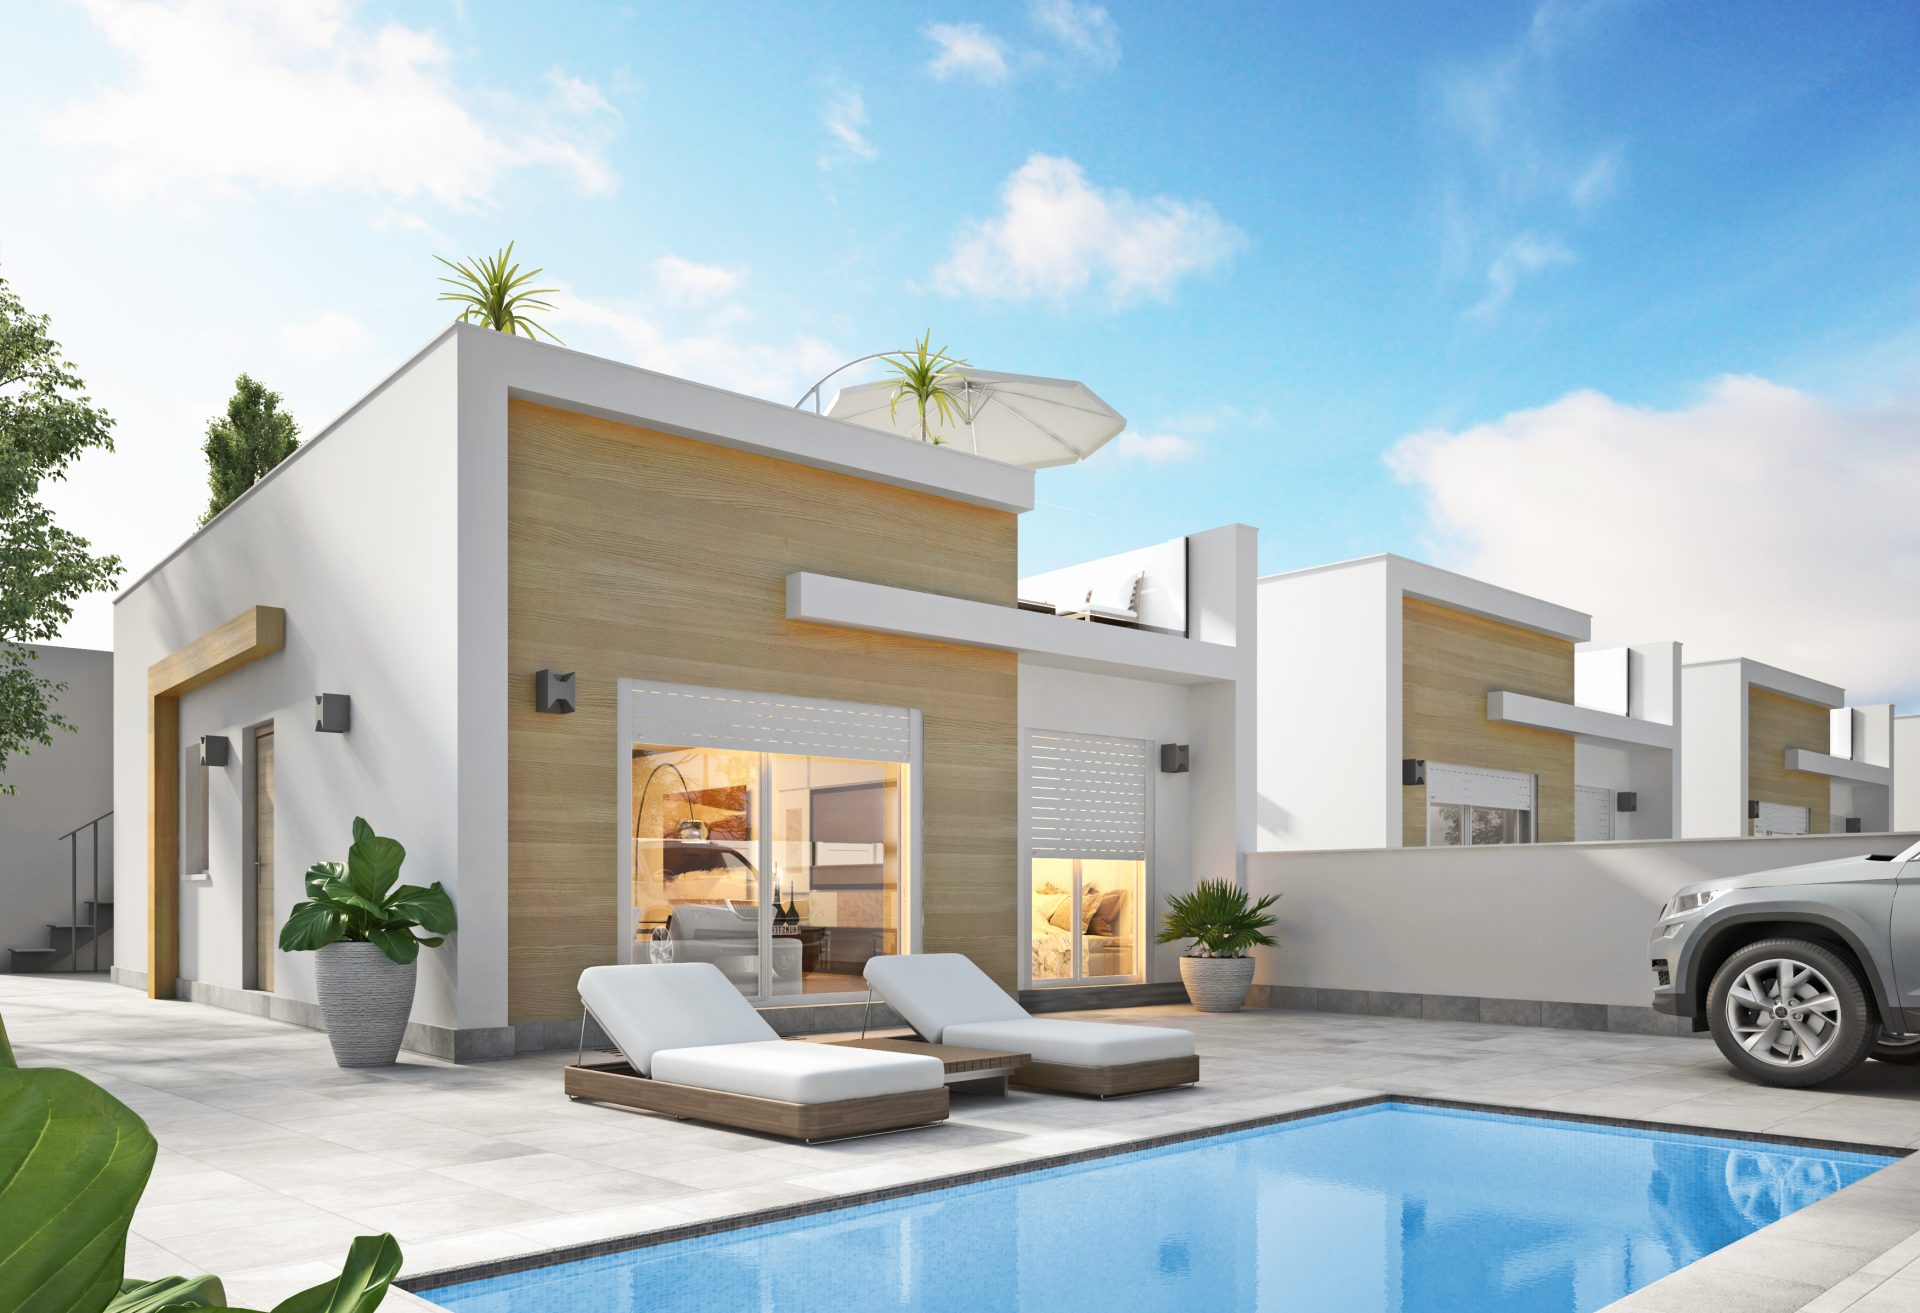 3 Bedroom Villa with Private Pool in Avileses Phase 2